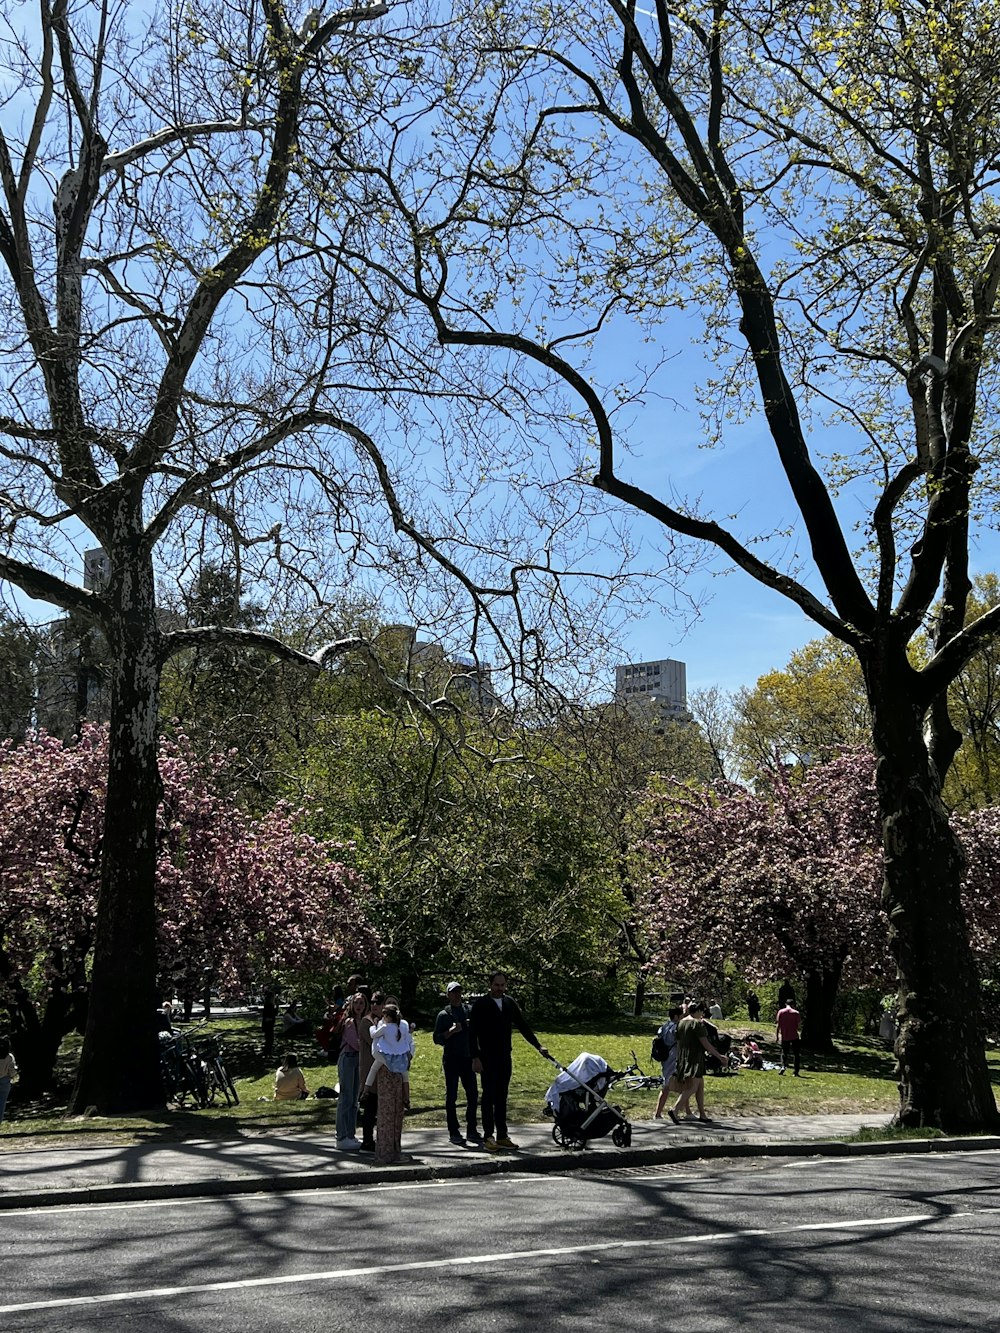 a group of people walking in a park with trees